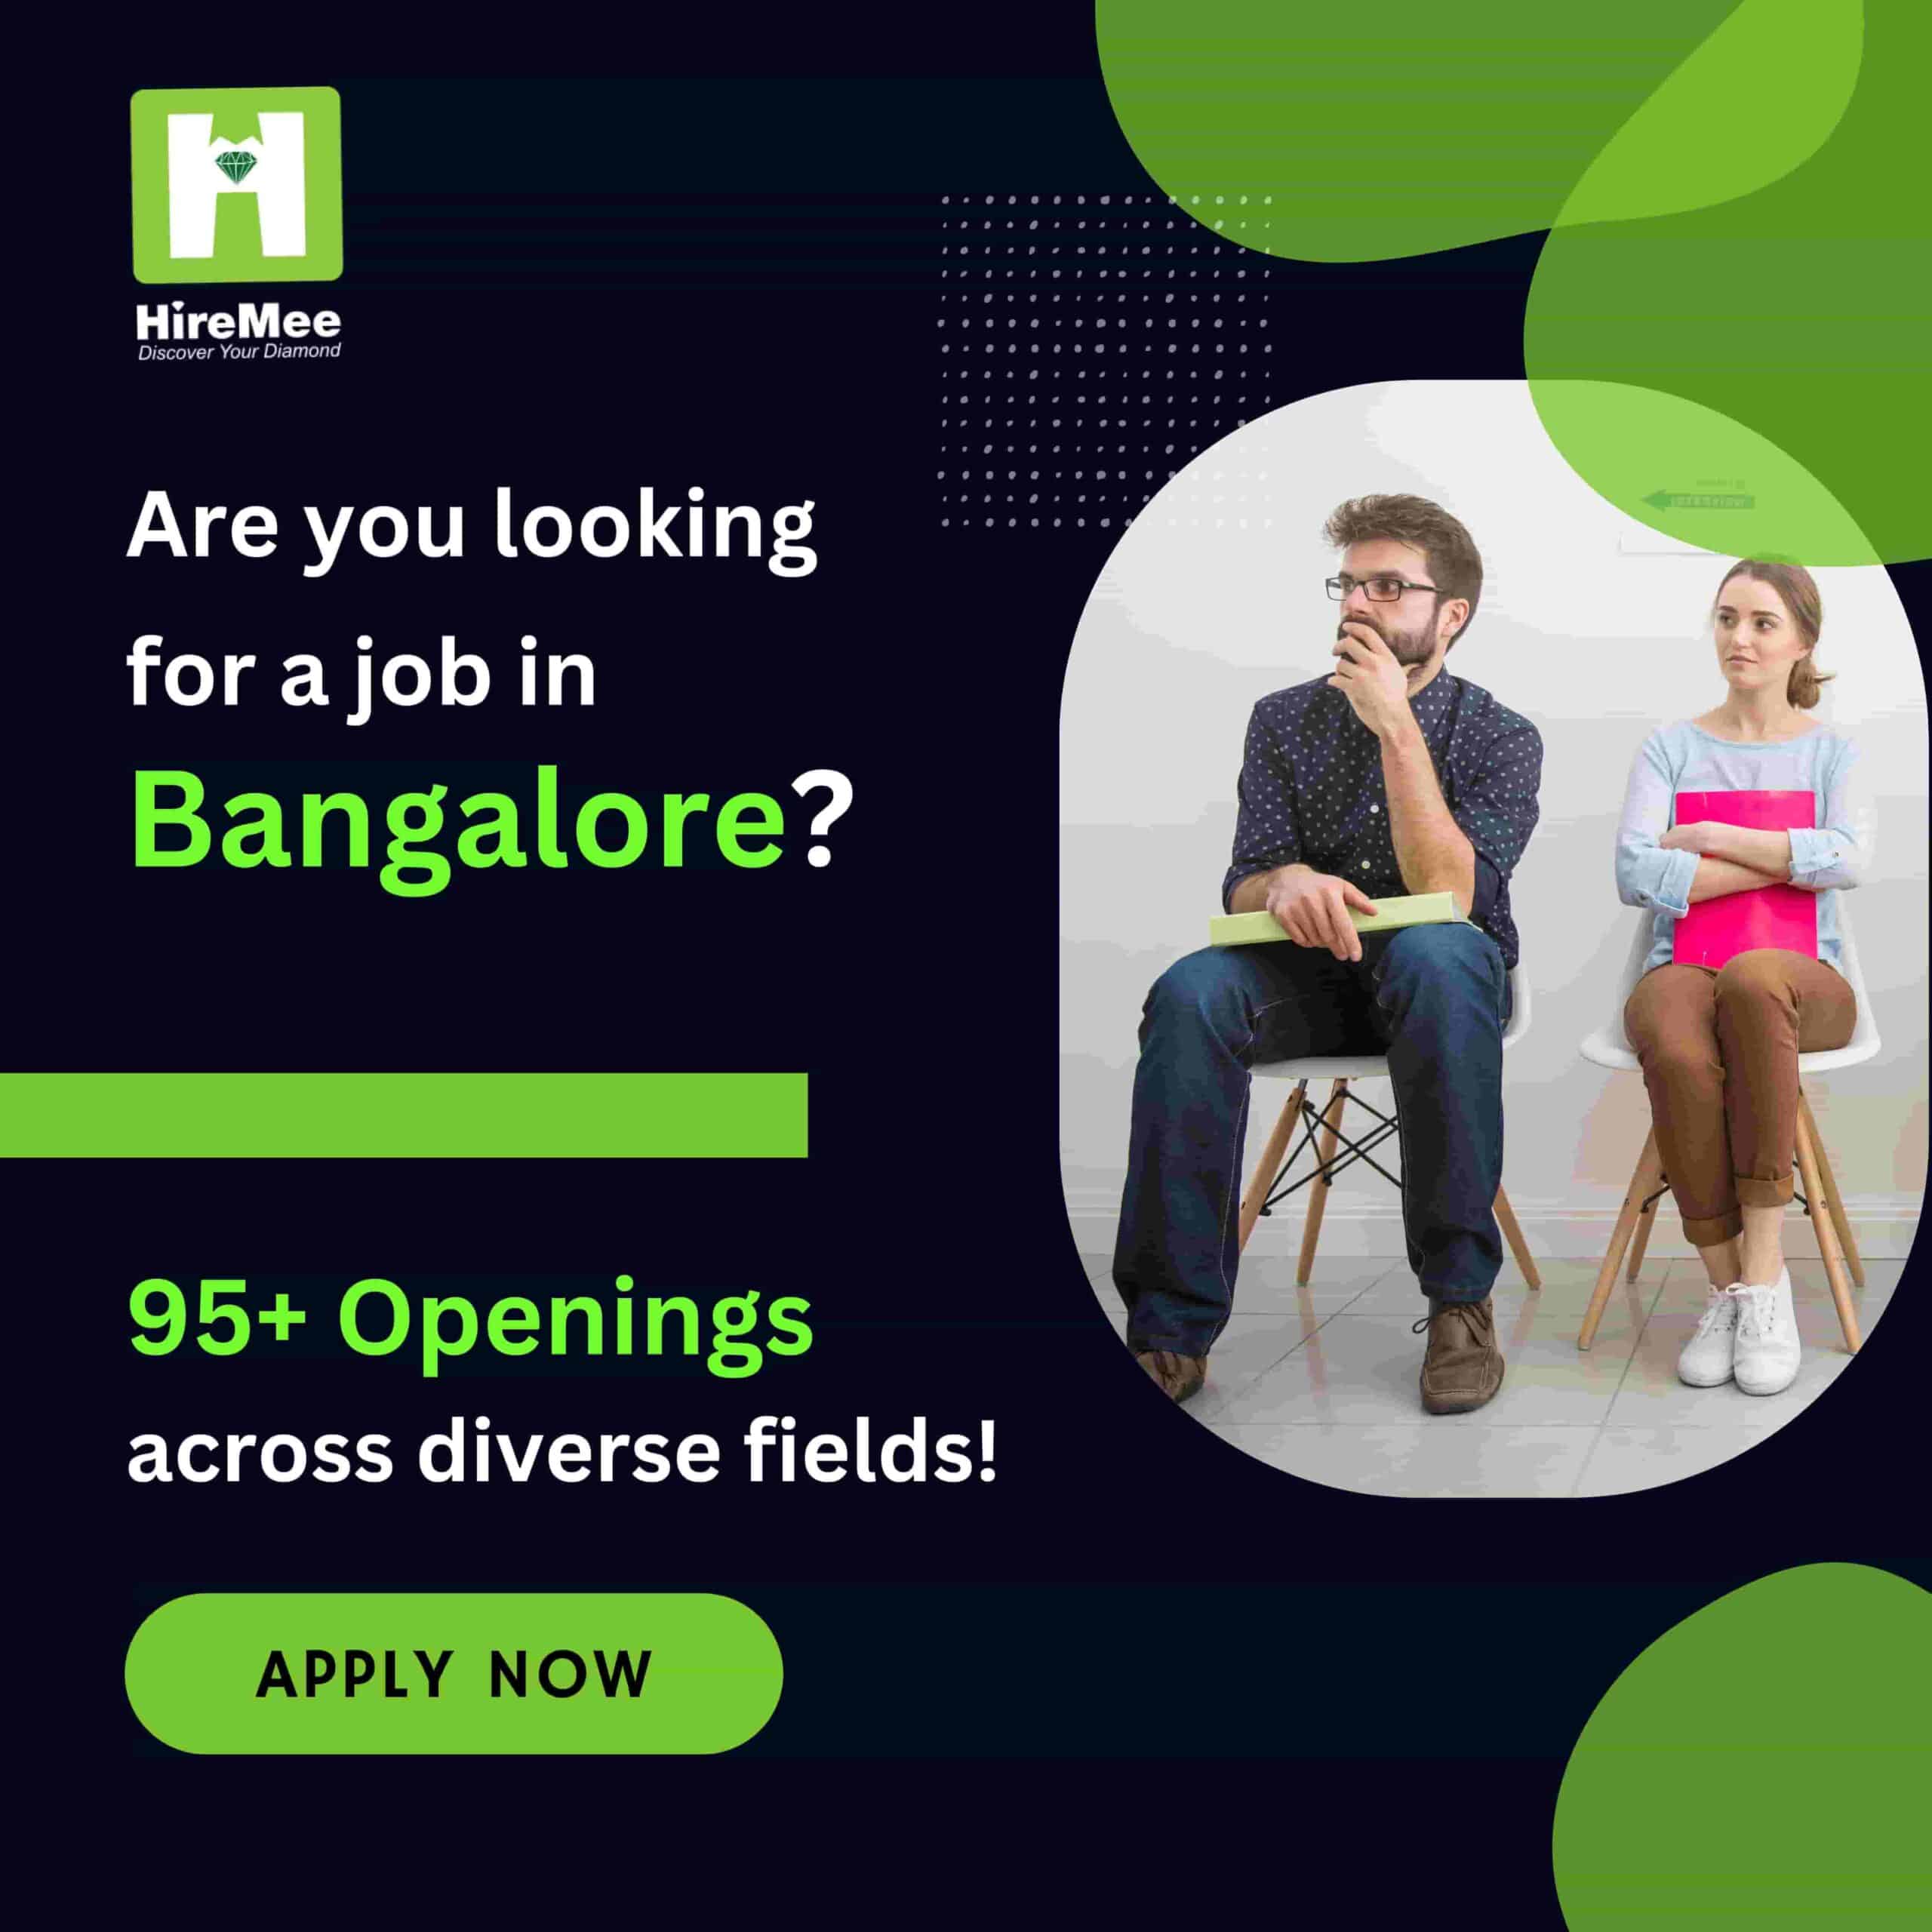 Full Time Jobs in Bangalore | HireMee